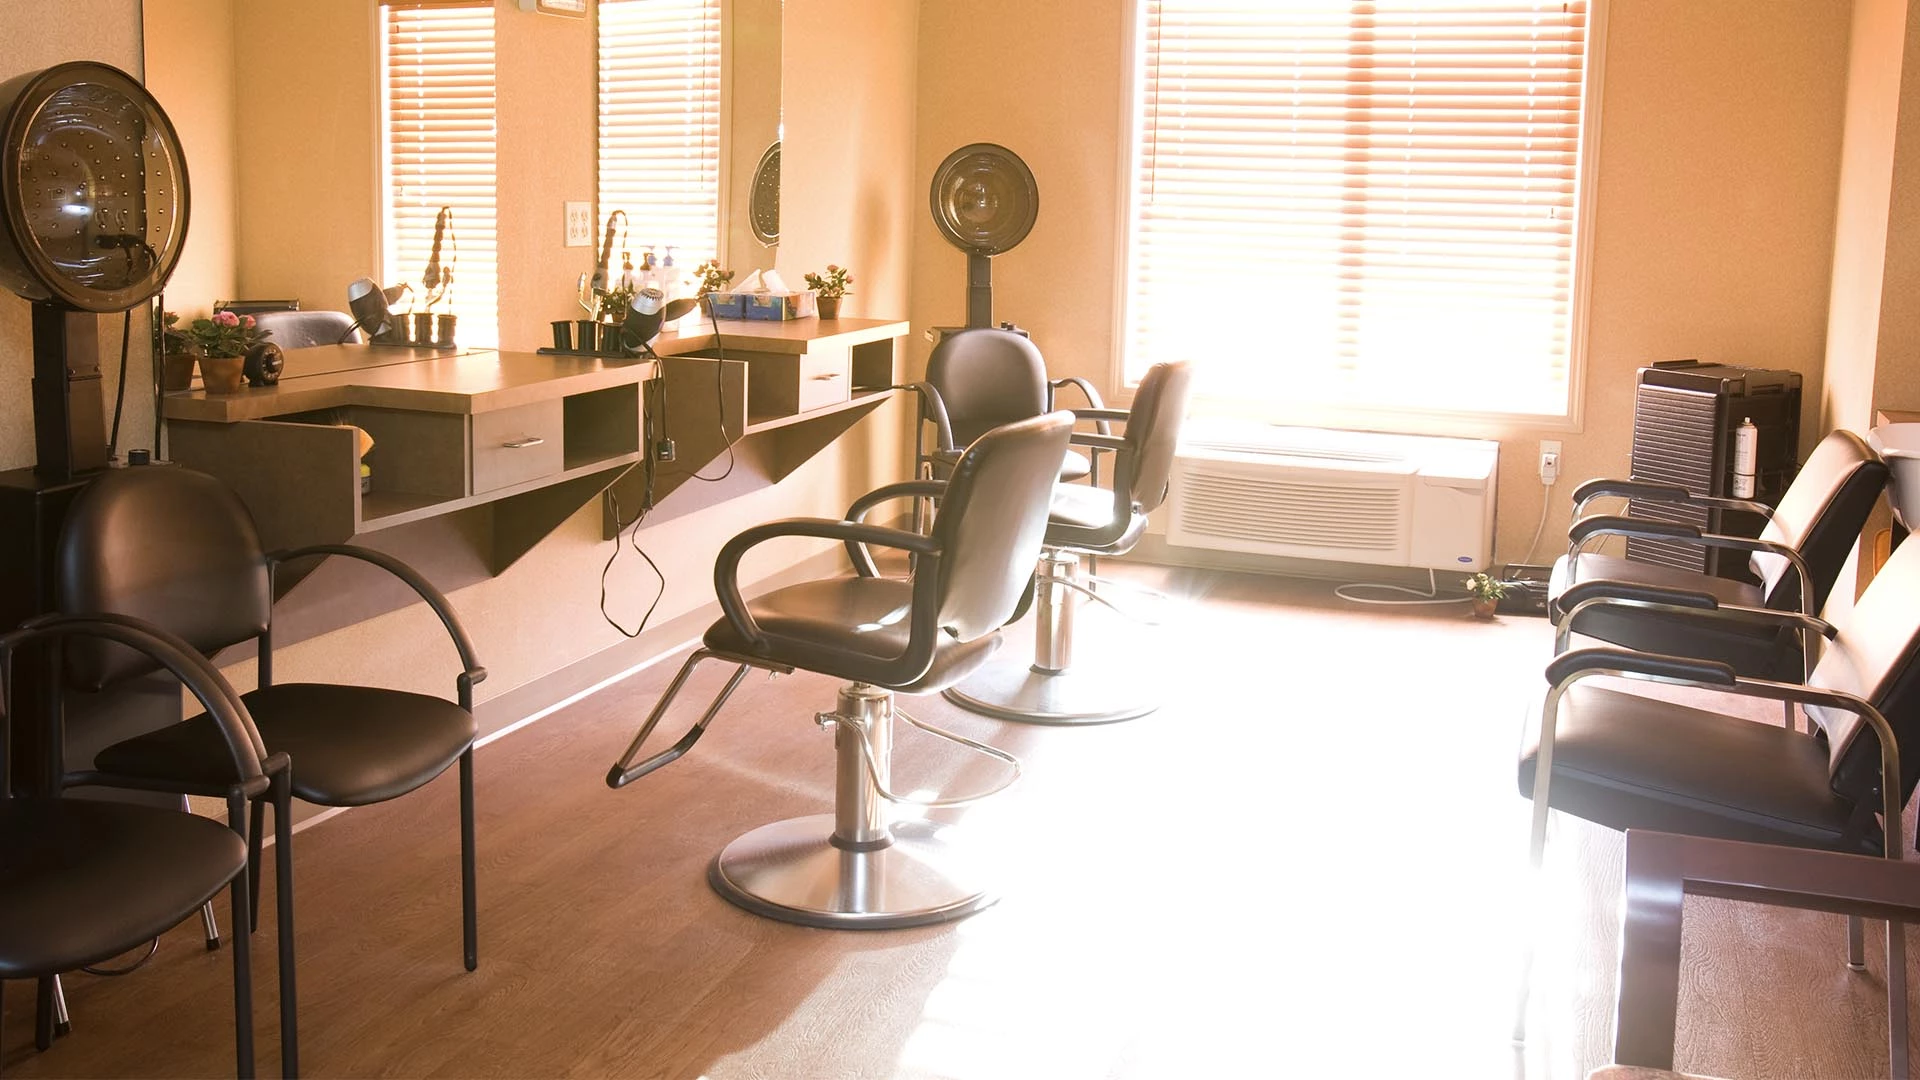 Beauty and hair salon with large window at Summerwood Village retirement home